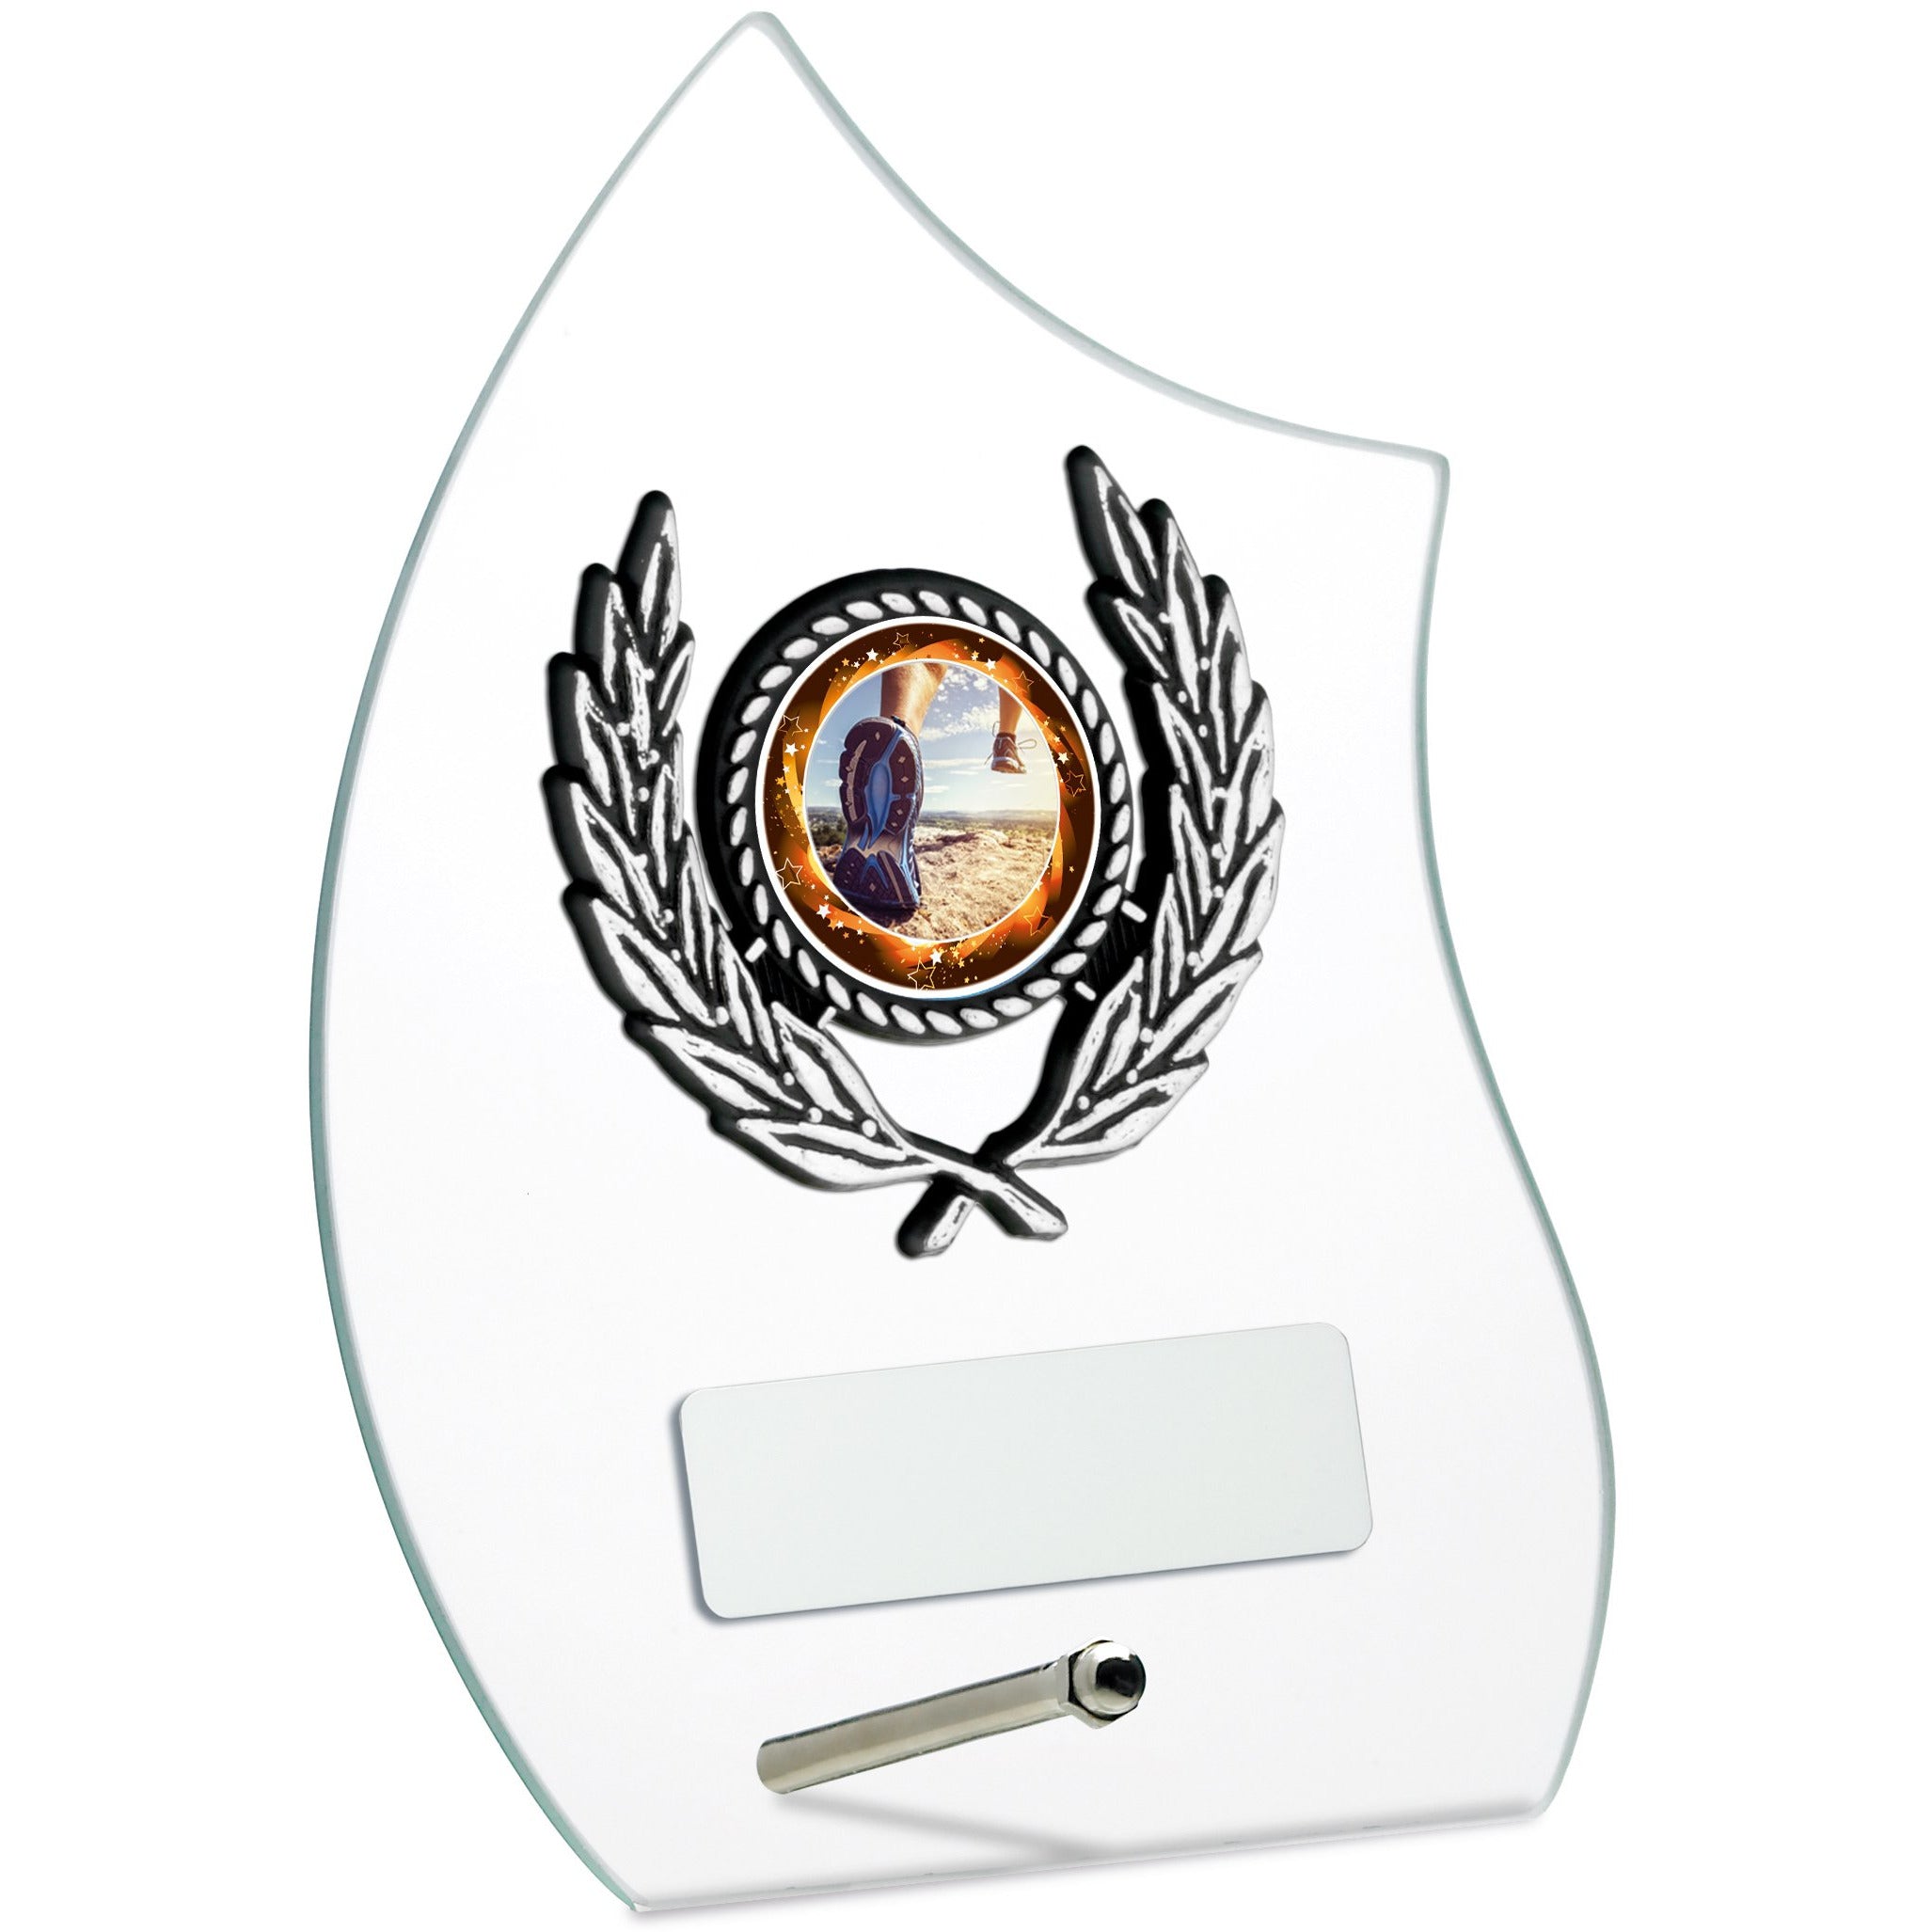 Glass Award with Laurel on Chrome Pin Stand